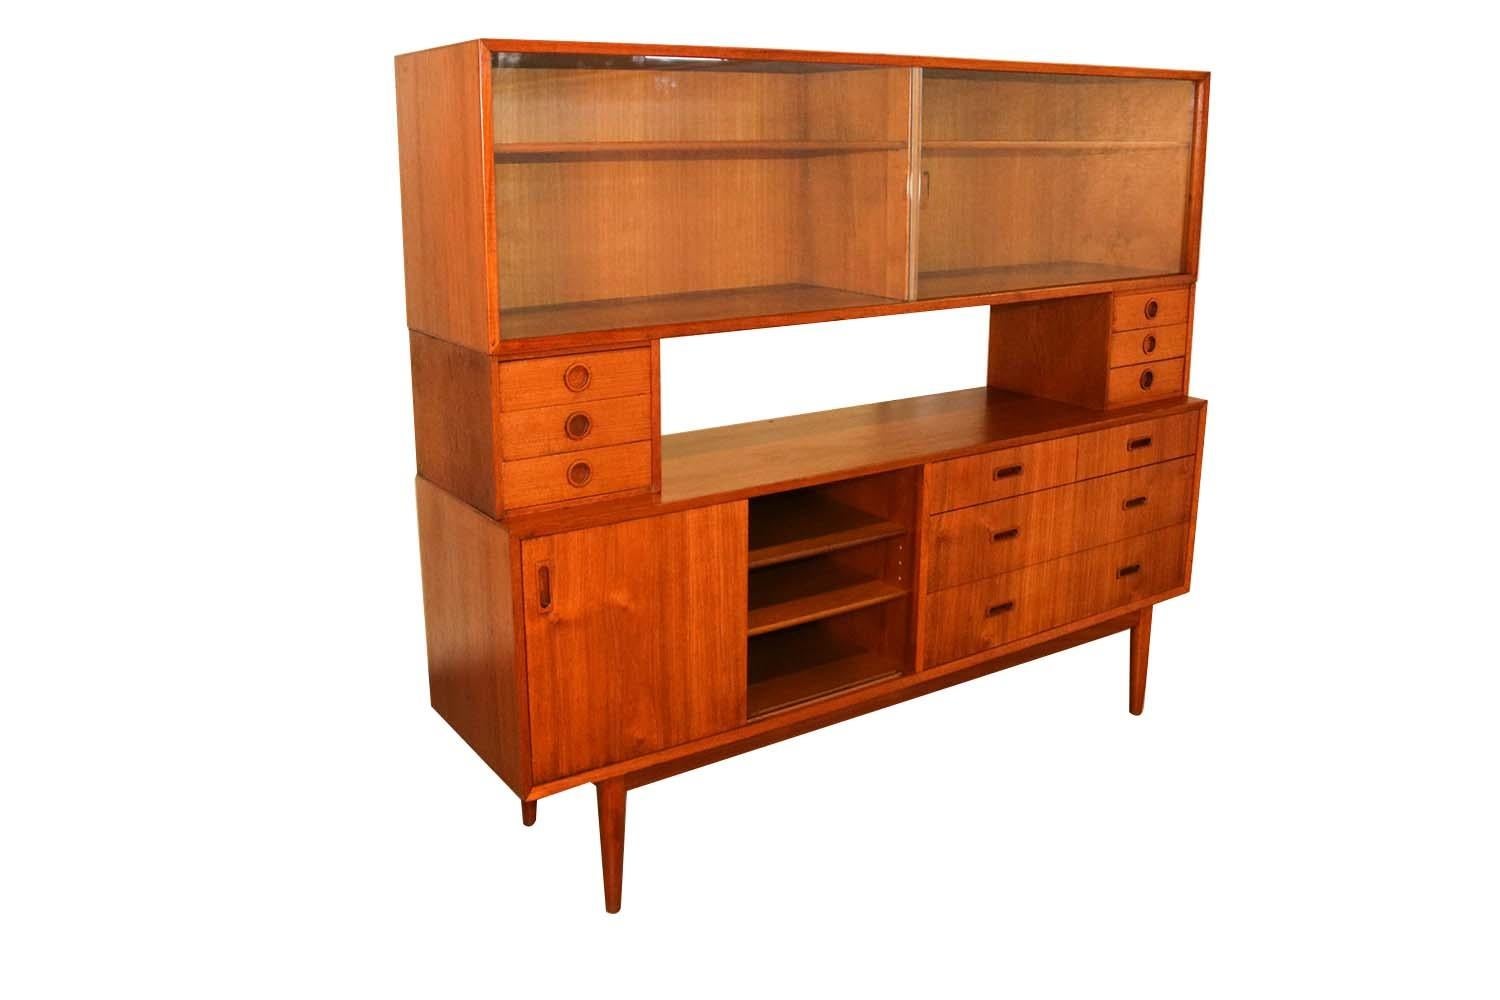 Simply perfect Danish teak credenza by Lyby Mobler, made in Denmark. A two-sided Mid-Century Modern teak credenza with carved teak pulls. This stylish modern room divider features rich teak patina, carved teak pulls with unique open and closed